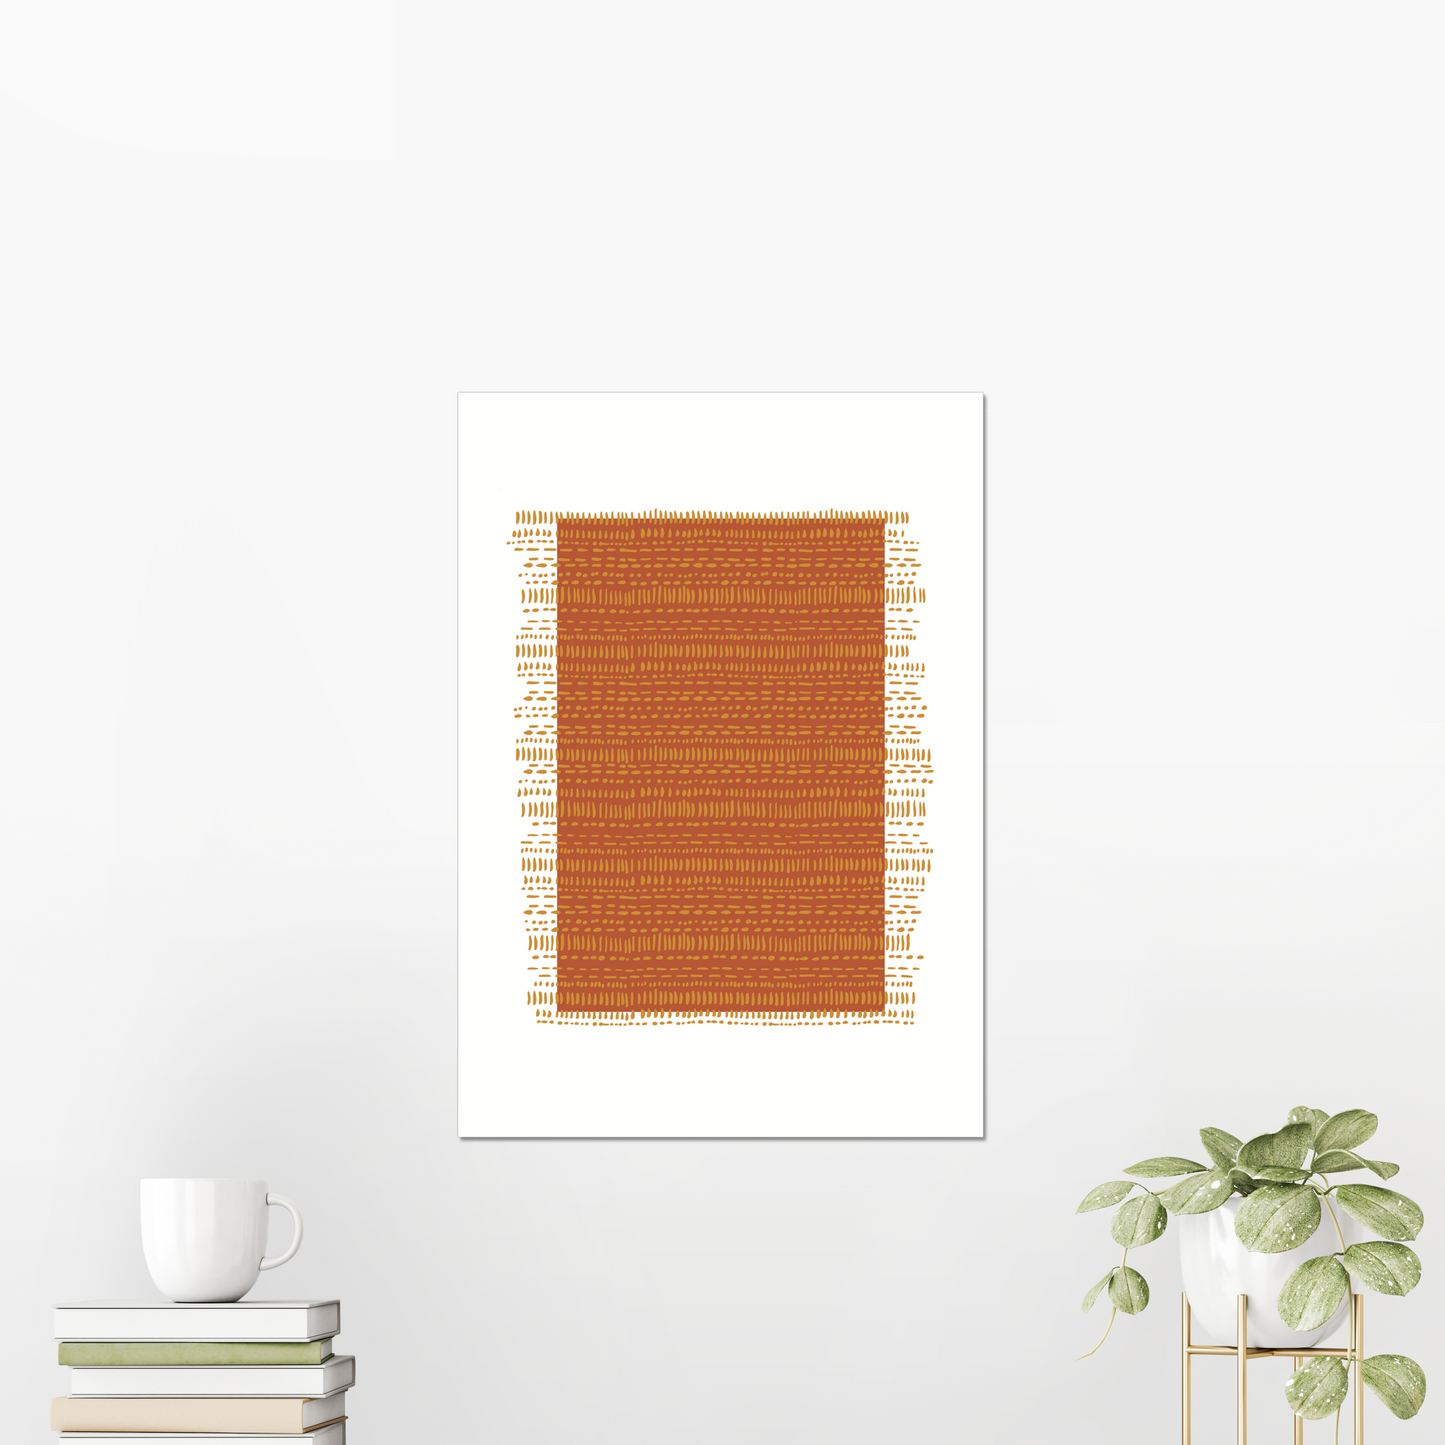 This beautiful art print is perfect for adding a touch of autumnal style to your home. The warm, earthy colors and minimalist bohemian pattern are sure to add a touch of charm and personality to any room.